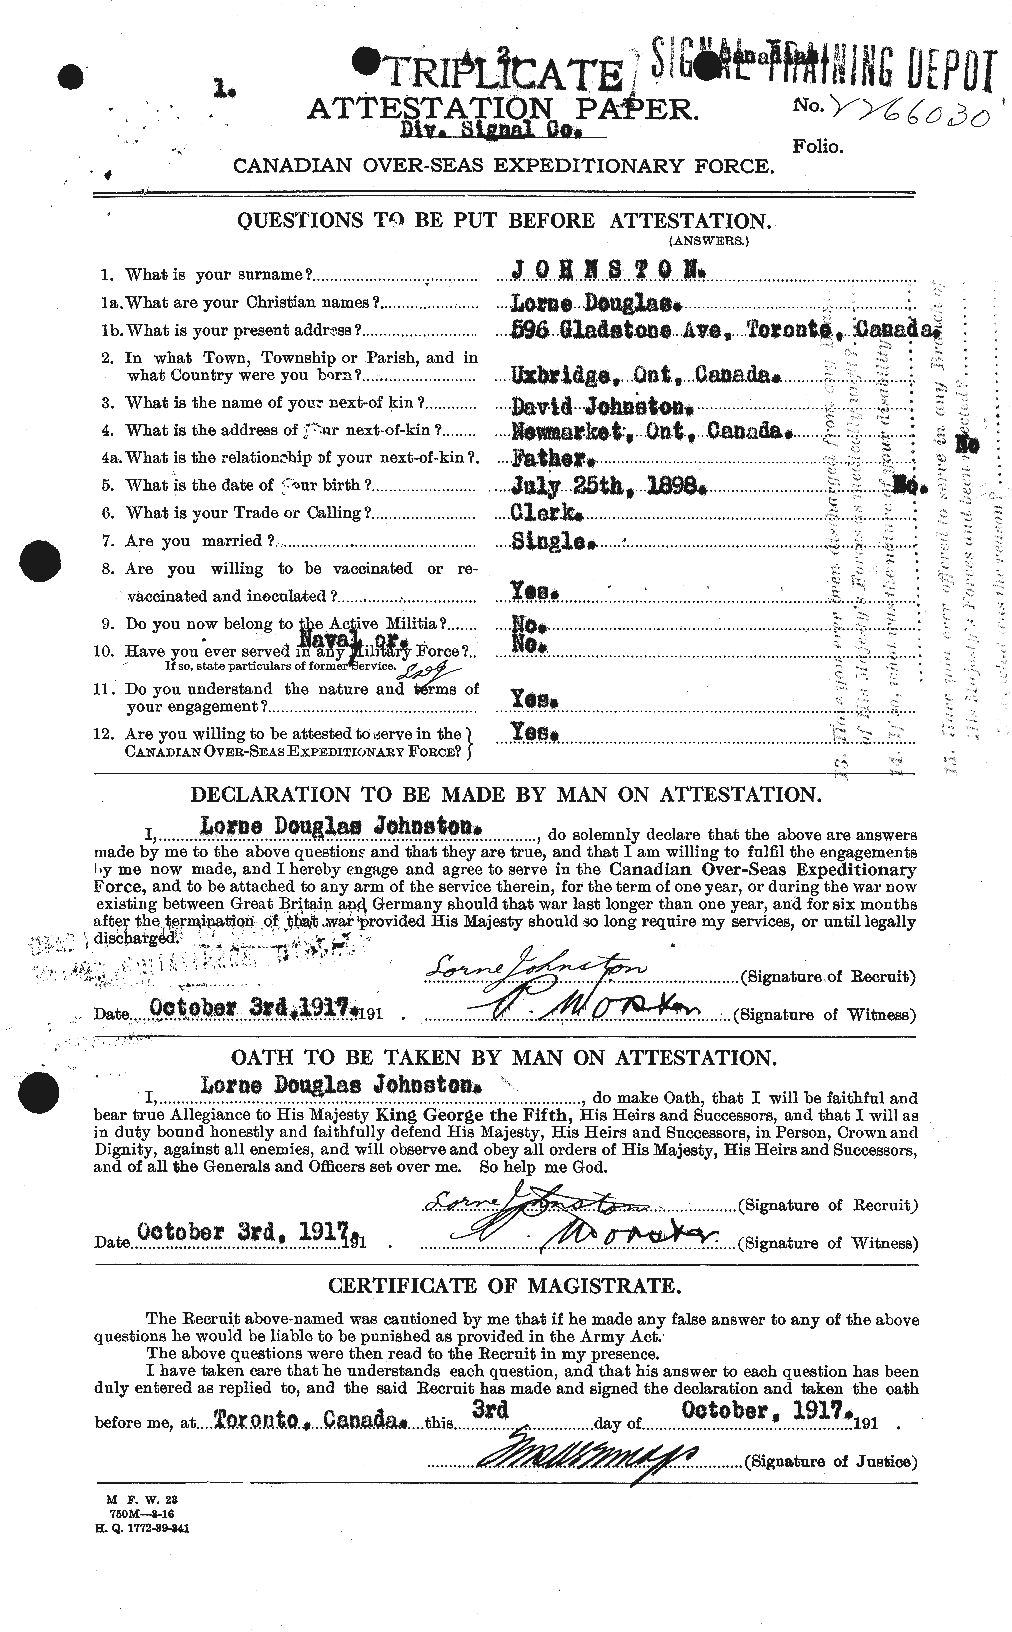 Personnel Records of the First World War - CEF 422957a